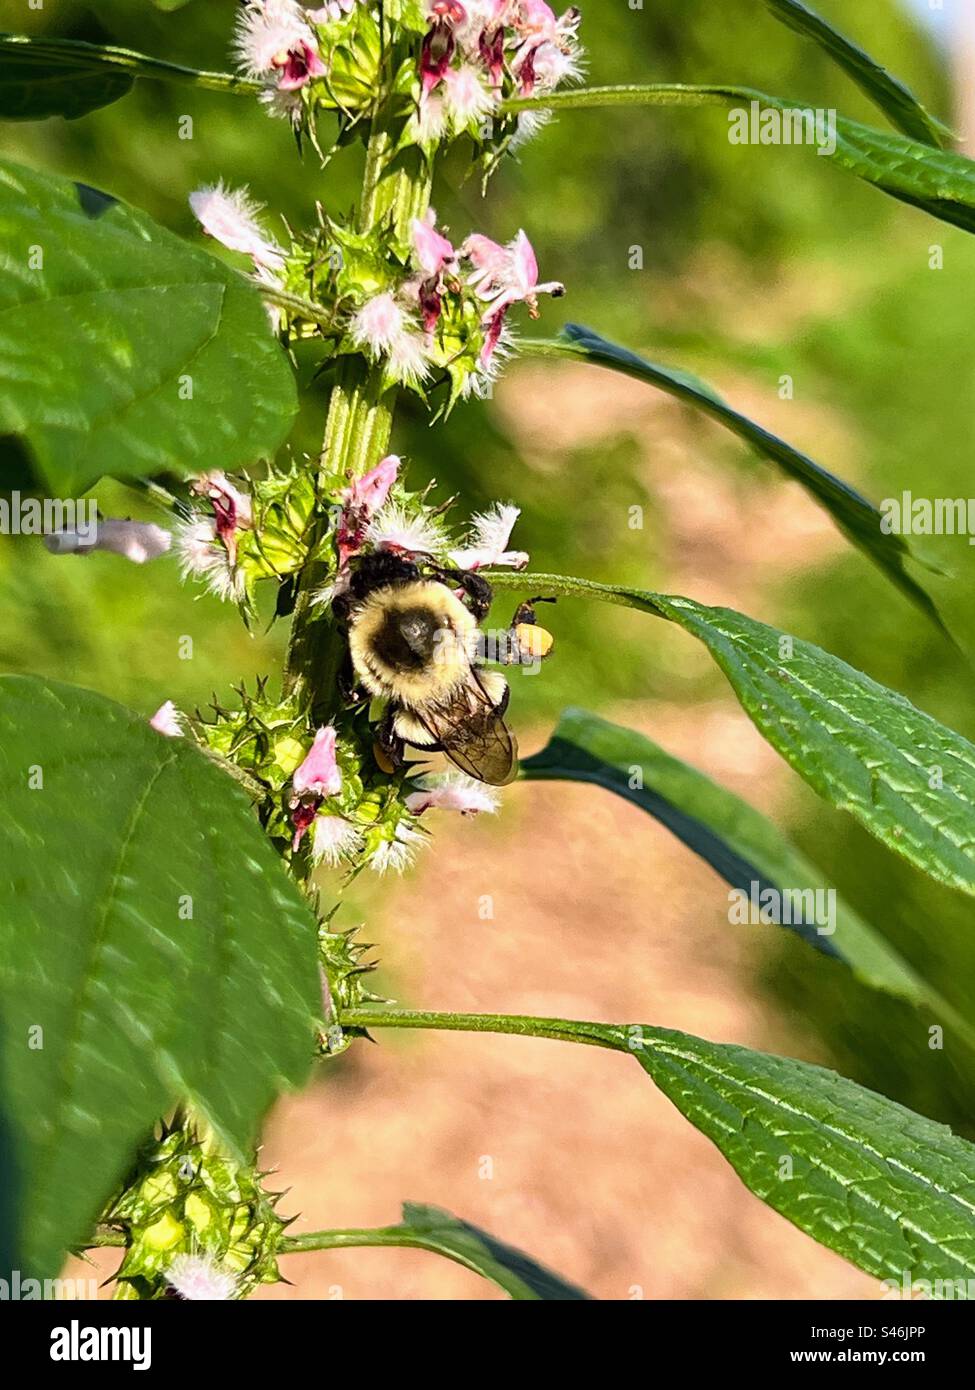 Common Eastern bumble bee gathering nectar Stock Photo